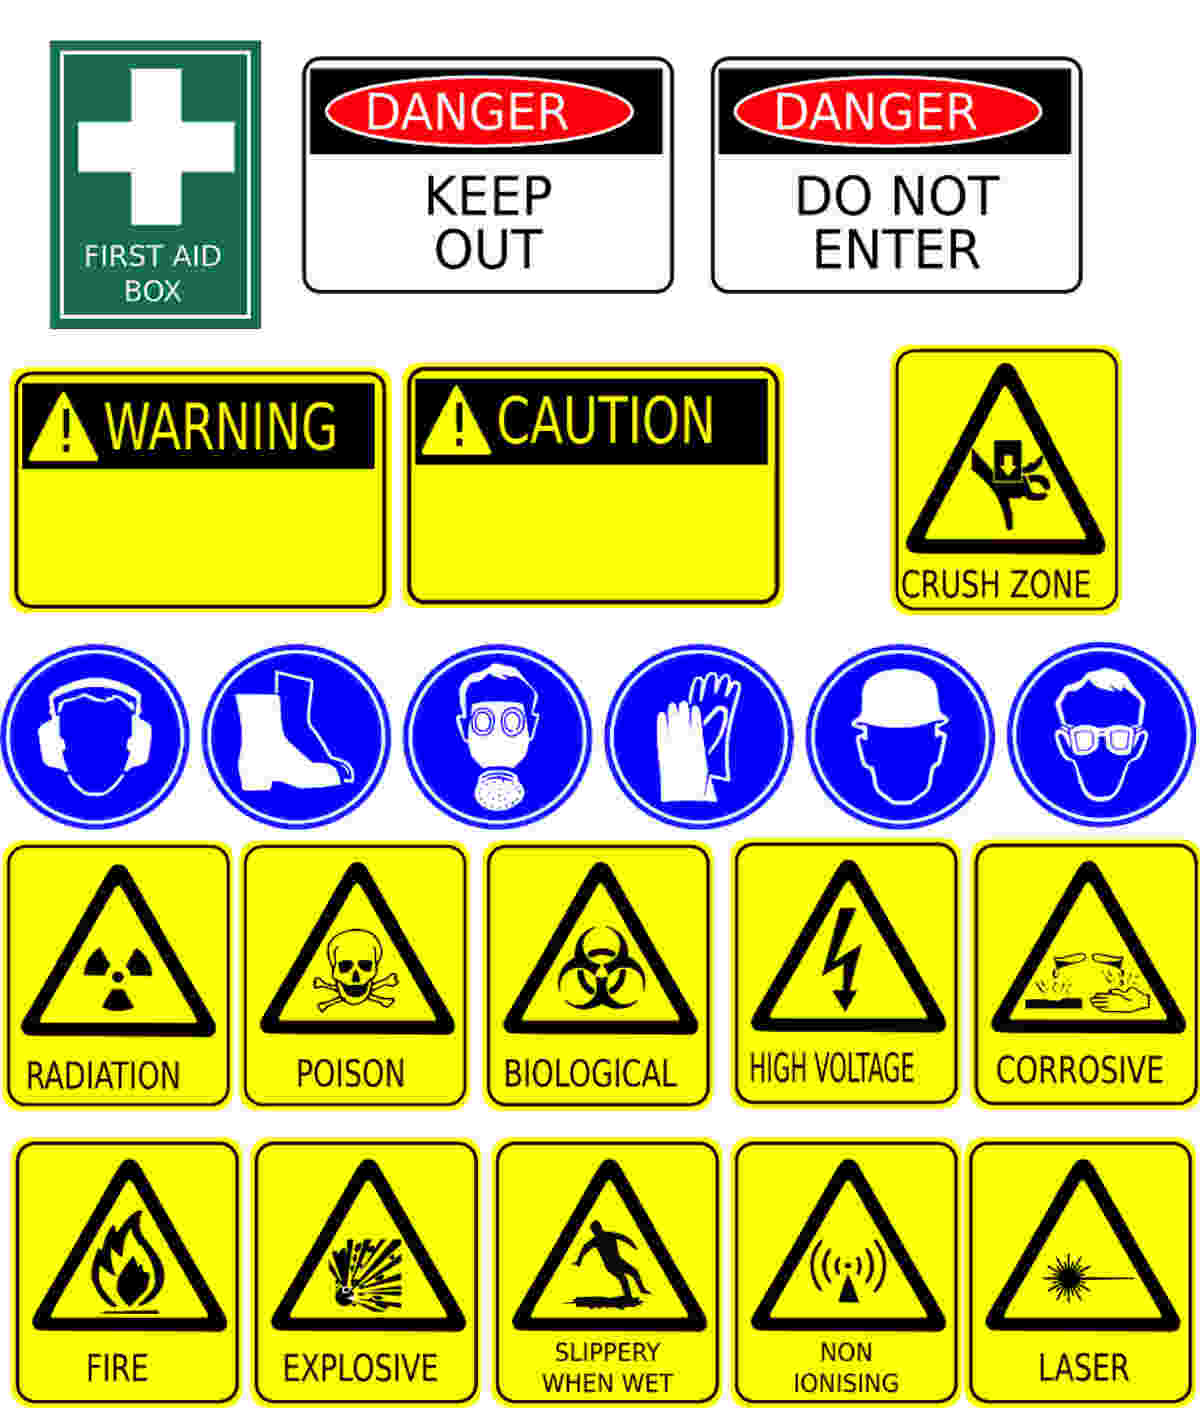 Examples of safety signs in a chemistry lab